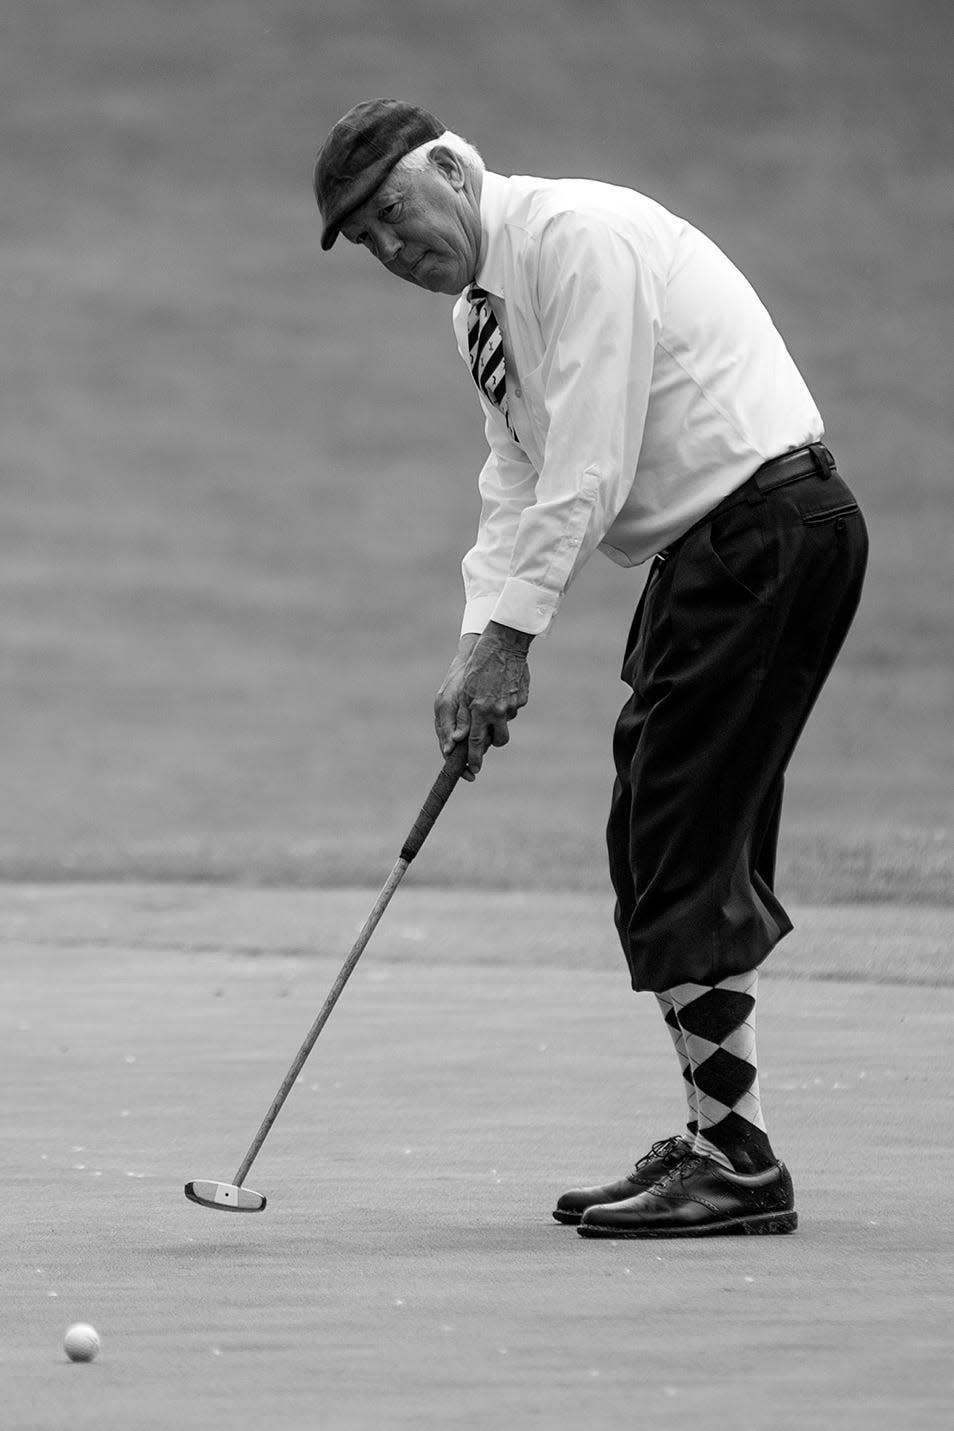 Galesburg's George Burgland partakes in The Society of Hickory Golfers' Mid American Hickory Golf Open last May at Soangetaha Country Club.